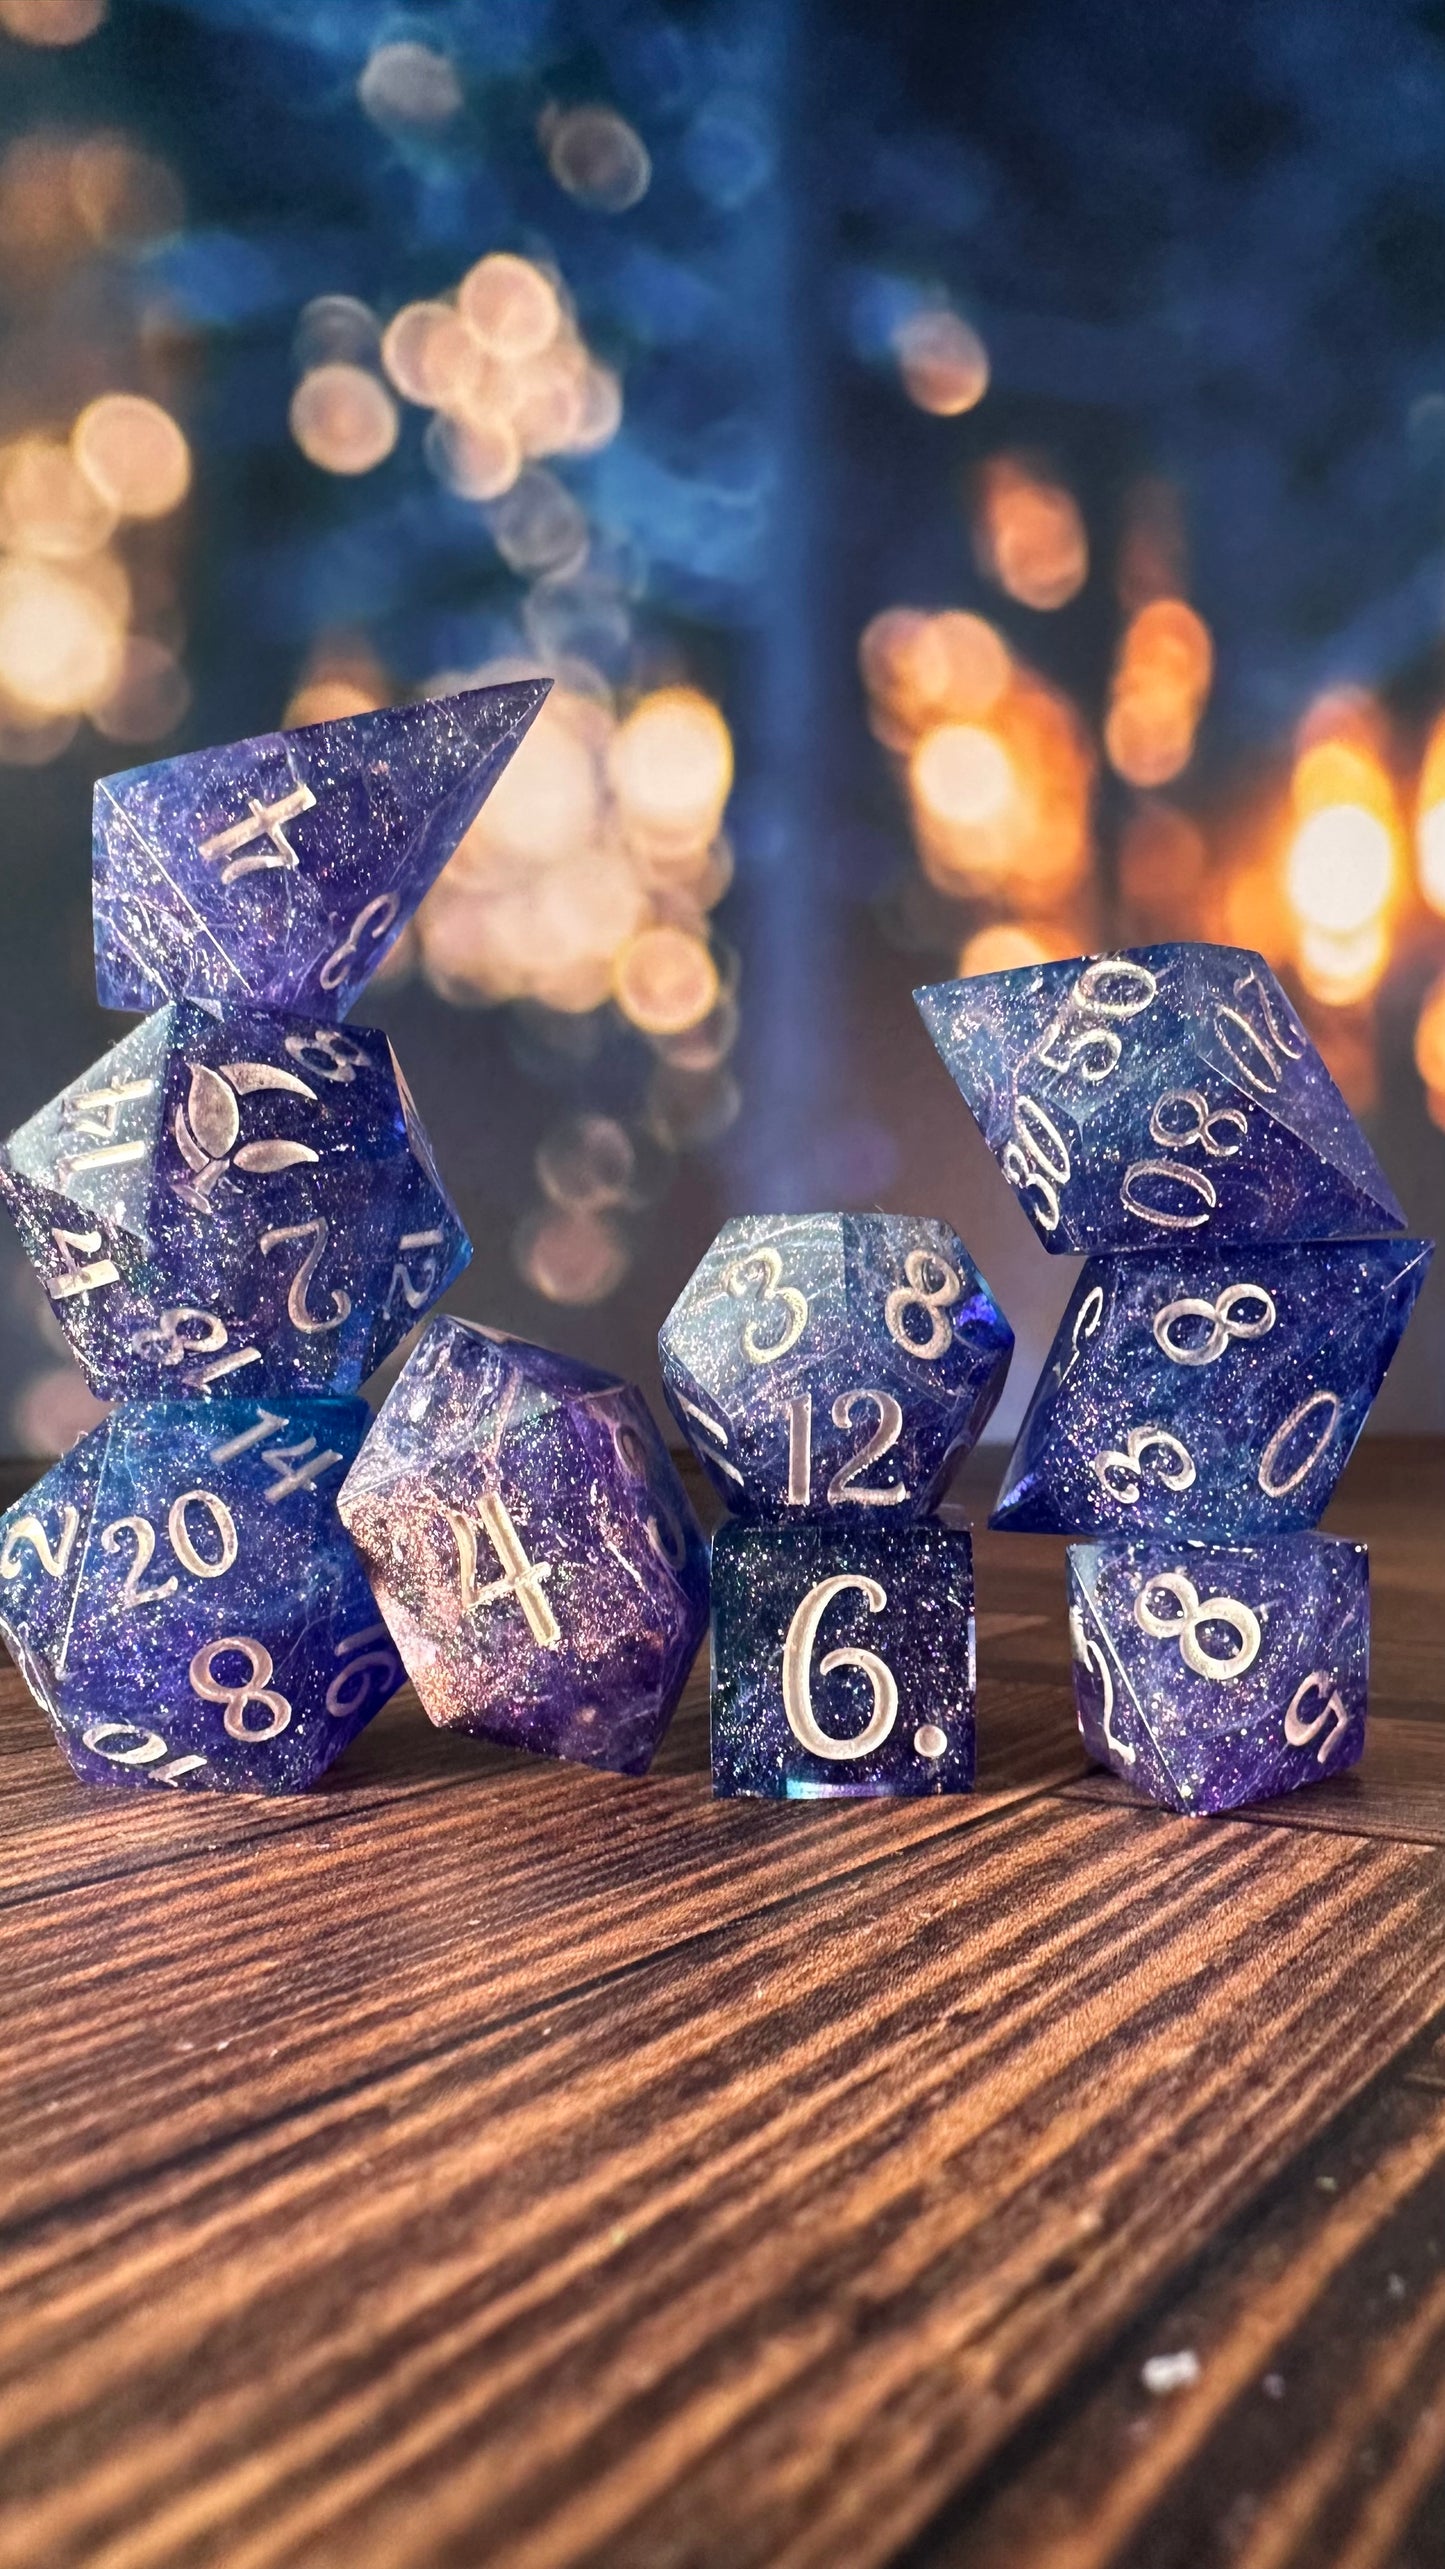 Super Powerful and Special Magic Starborn Princess- 8 piece polyhedral dice set